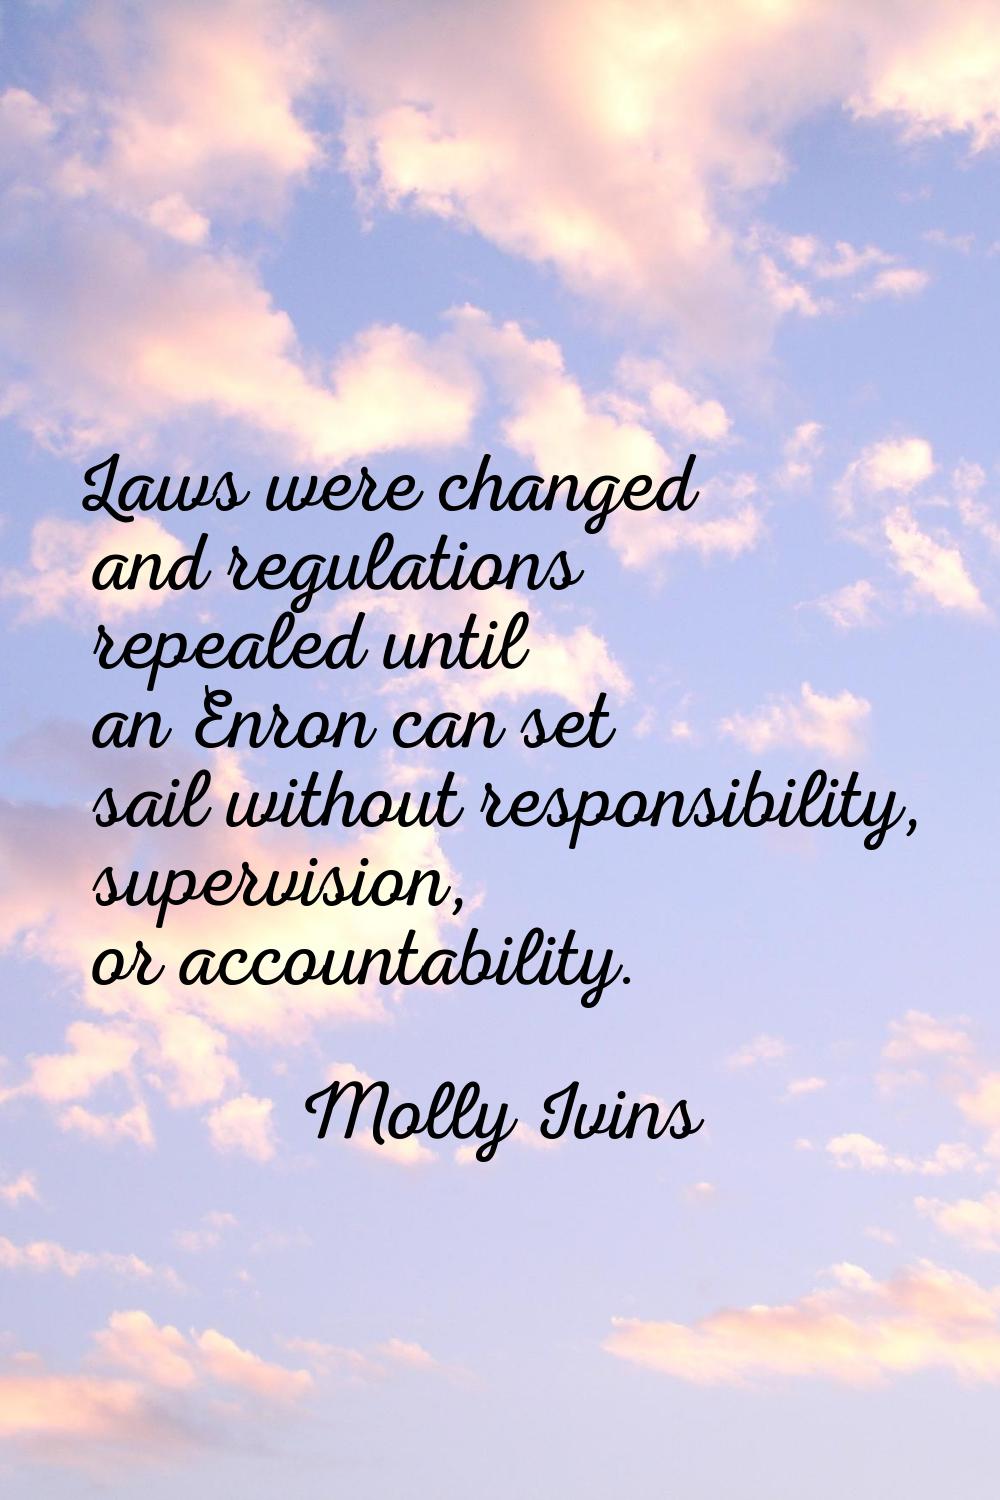 Laws were changed and regulations repealed until an Enron can set sail without responsibility, supe